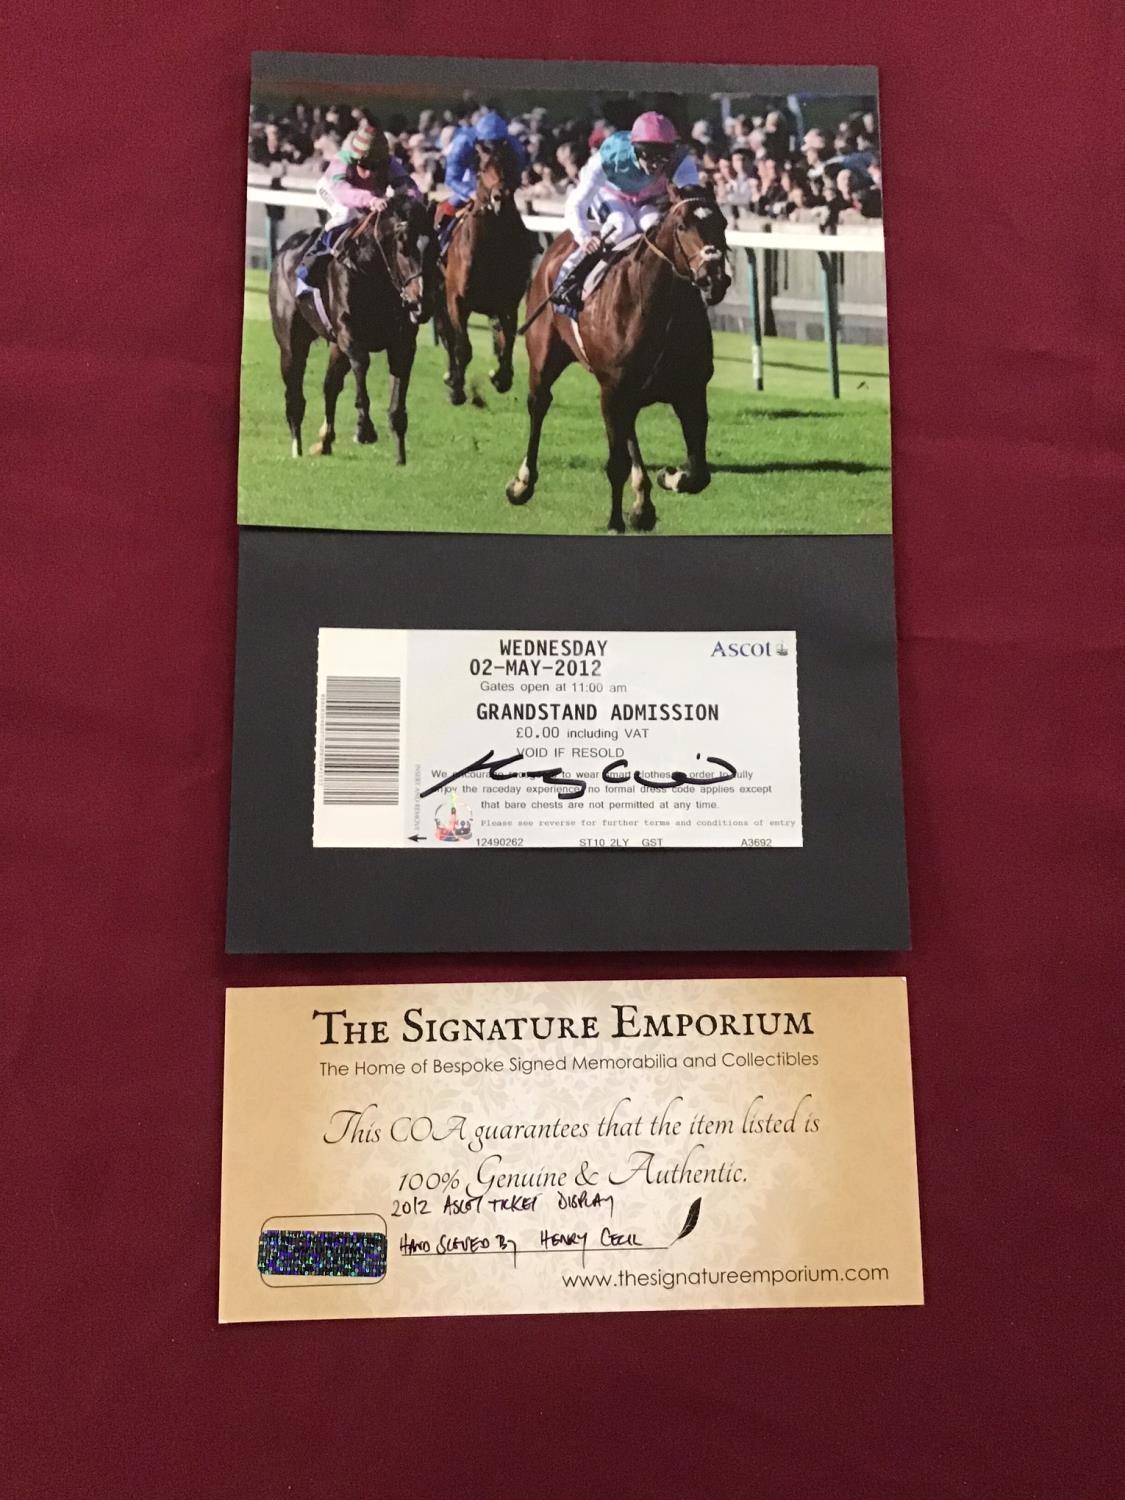 Mounted photograph and a Grand Stand admission ticket for Ascot signed by Henry Cecil with